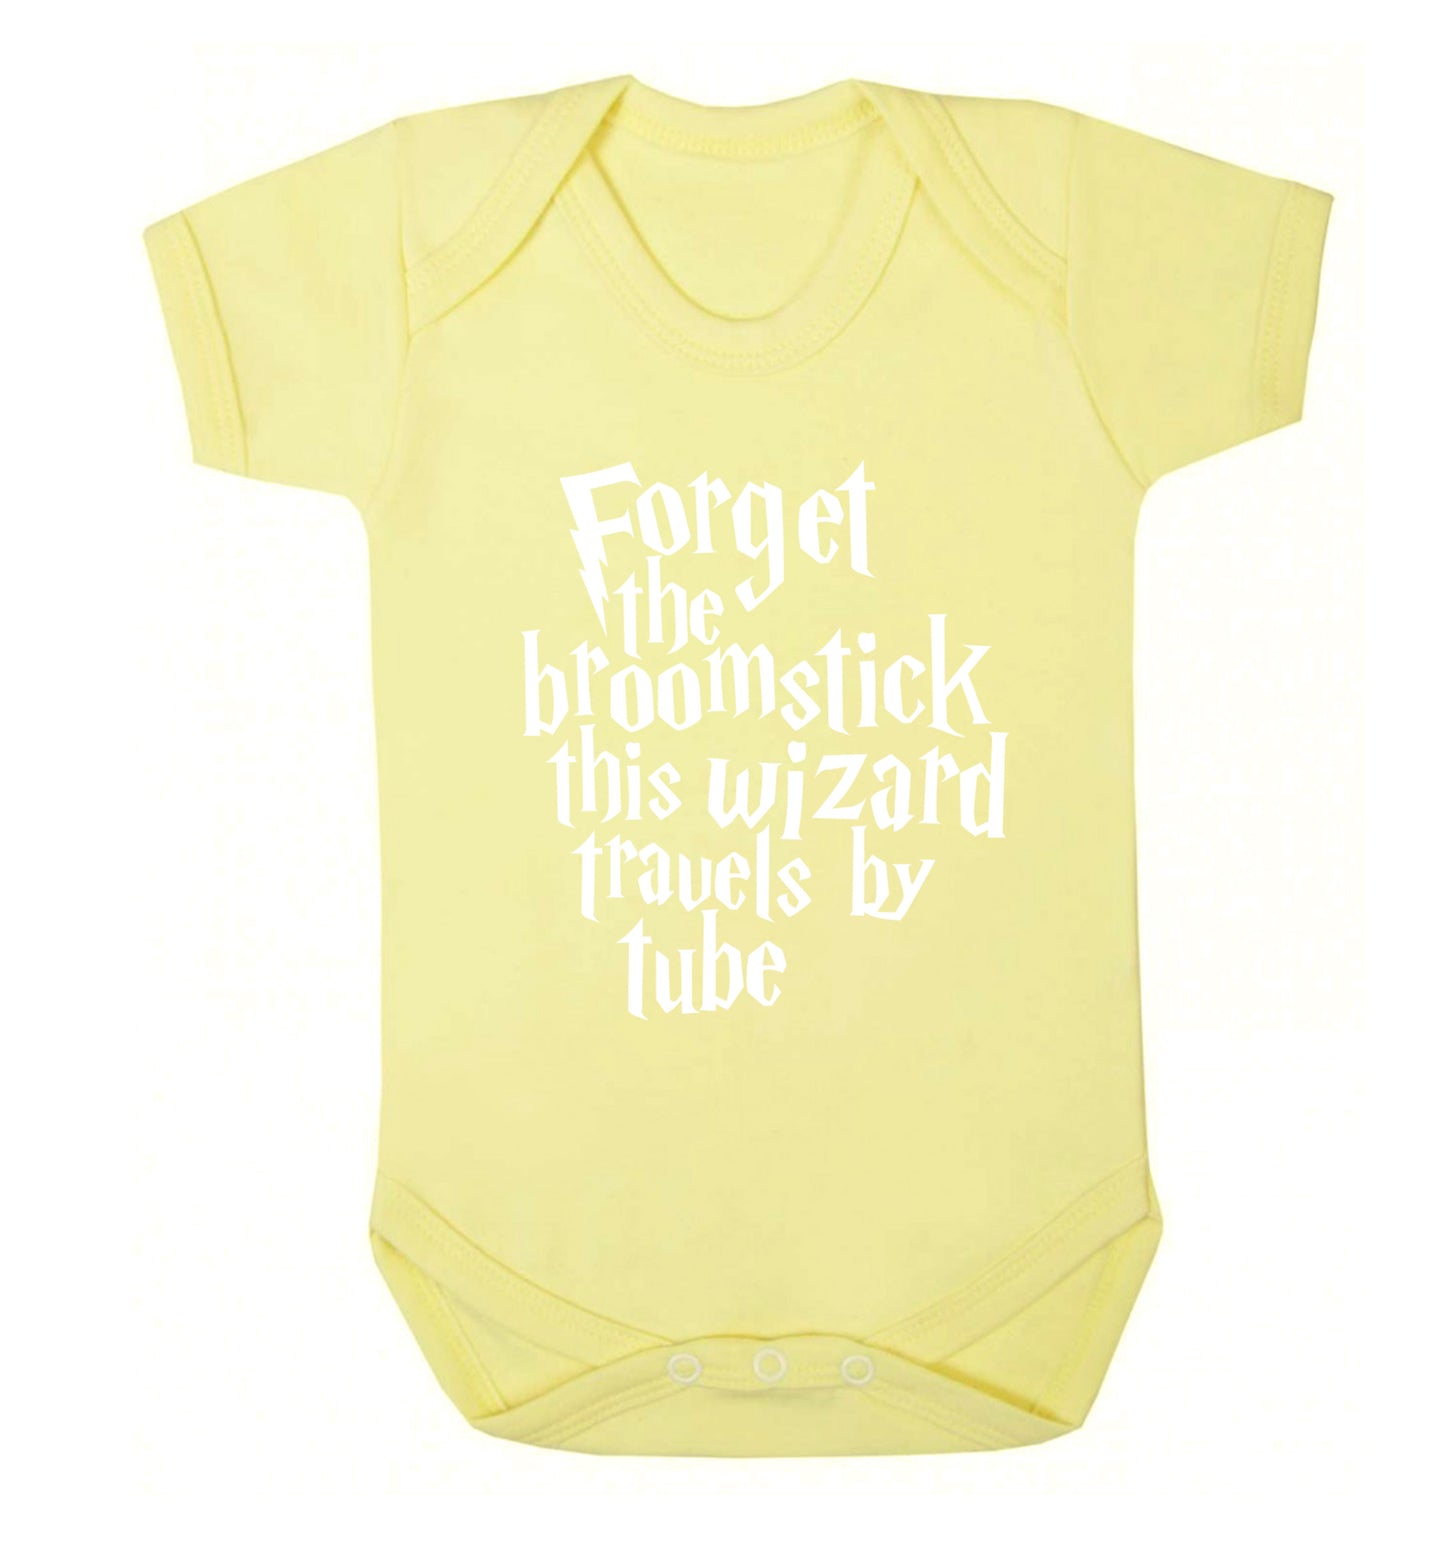 Forget the broomstick this wizard travels by tube Baby Vest pale yellow 18-24 months